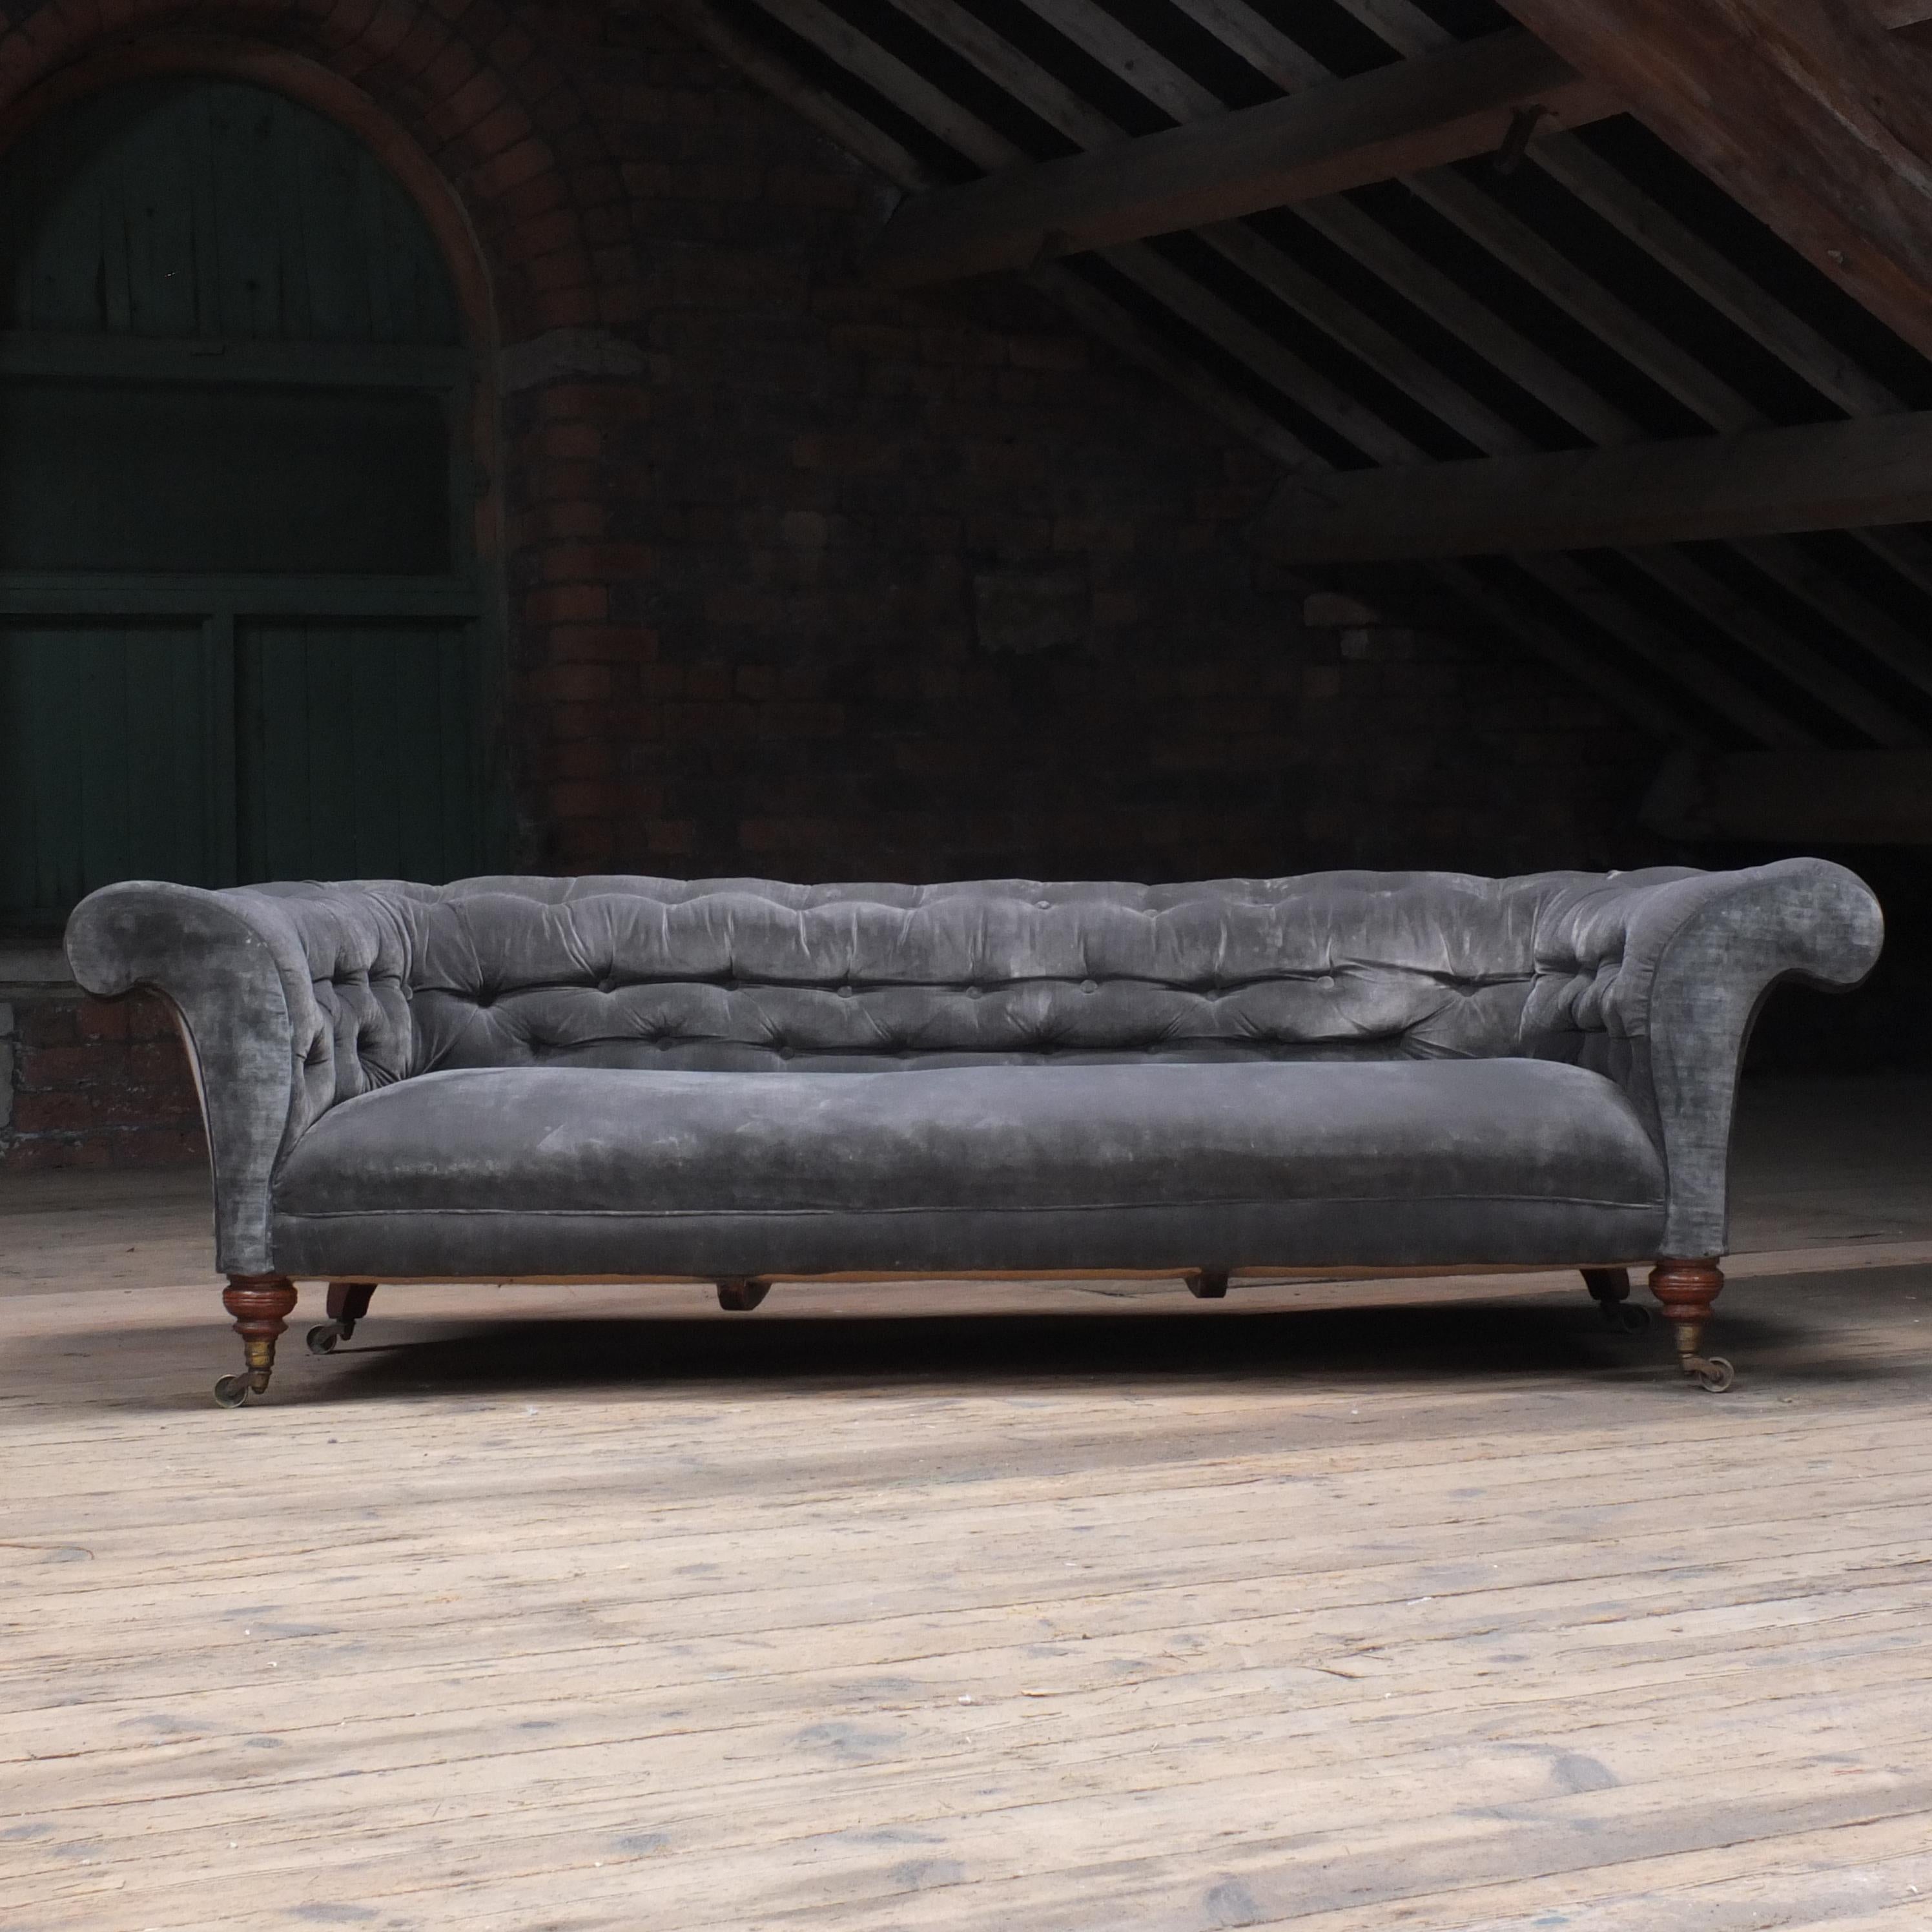 A Large country house English chesterfield sofa by Howard & sons - London. Raised on Howard's uniquely ring turned walnut legs to the front and out swept to the back, all on Howard & son's stamped castors. The low sleek design of Howard